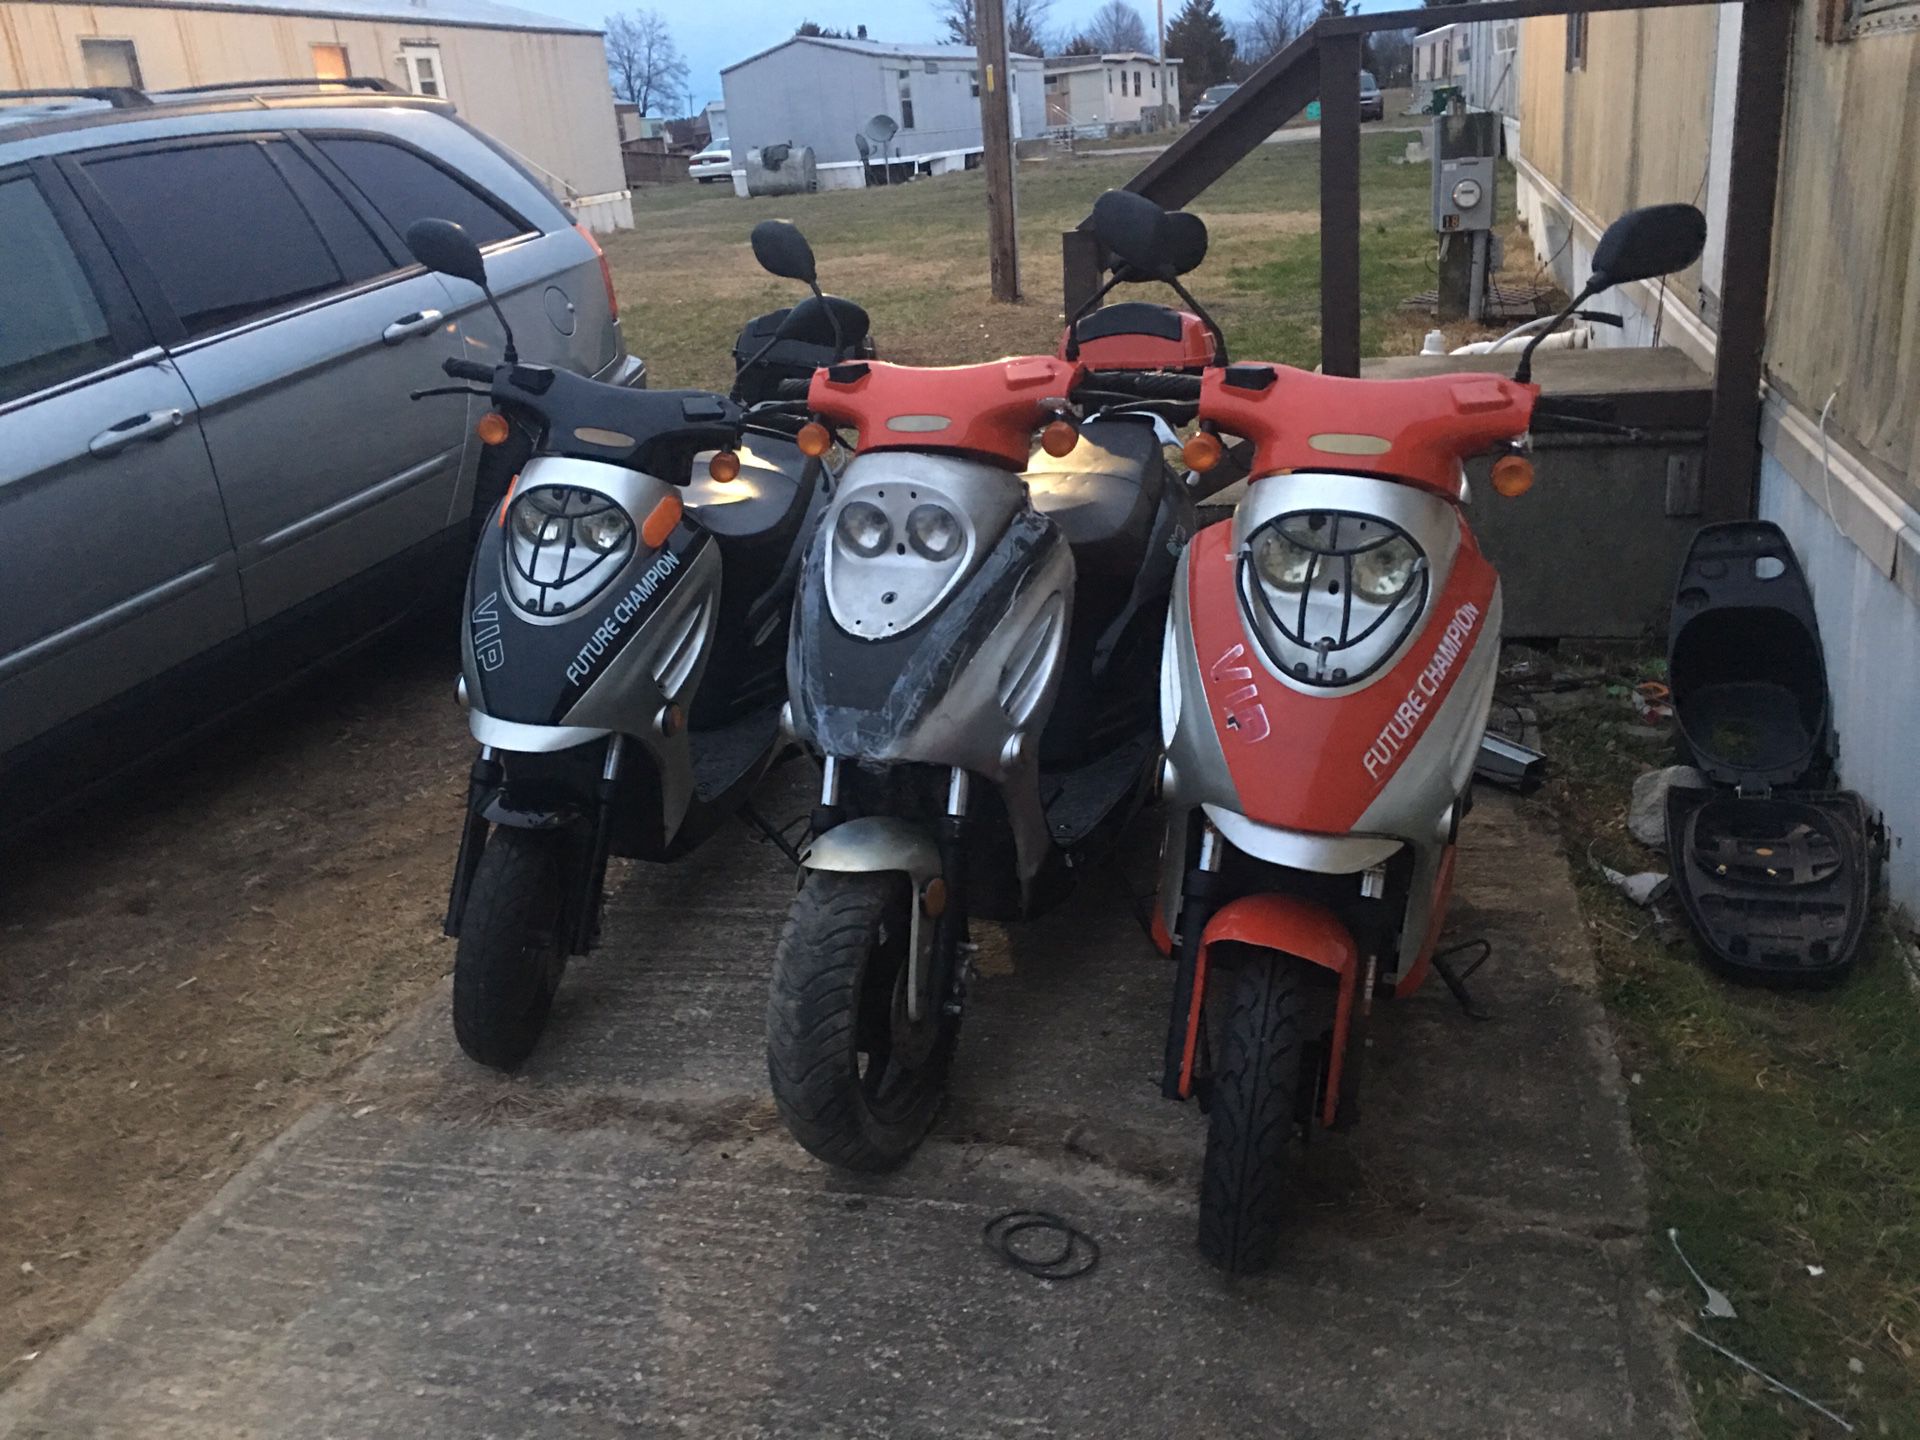 Vip 50cc scooter $250 red